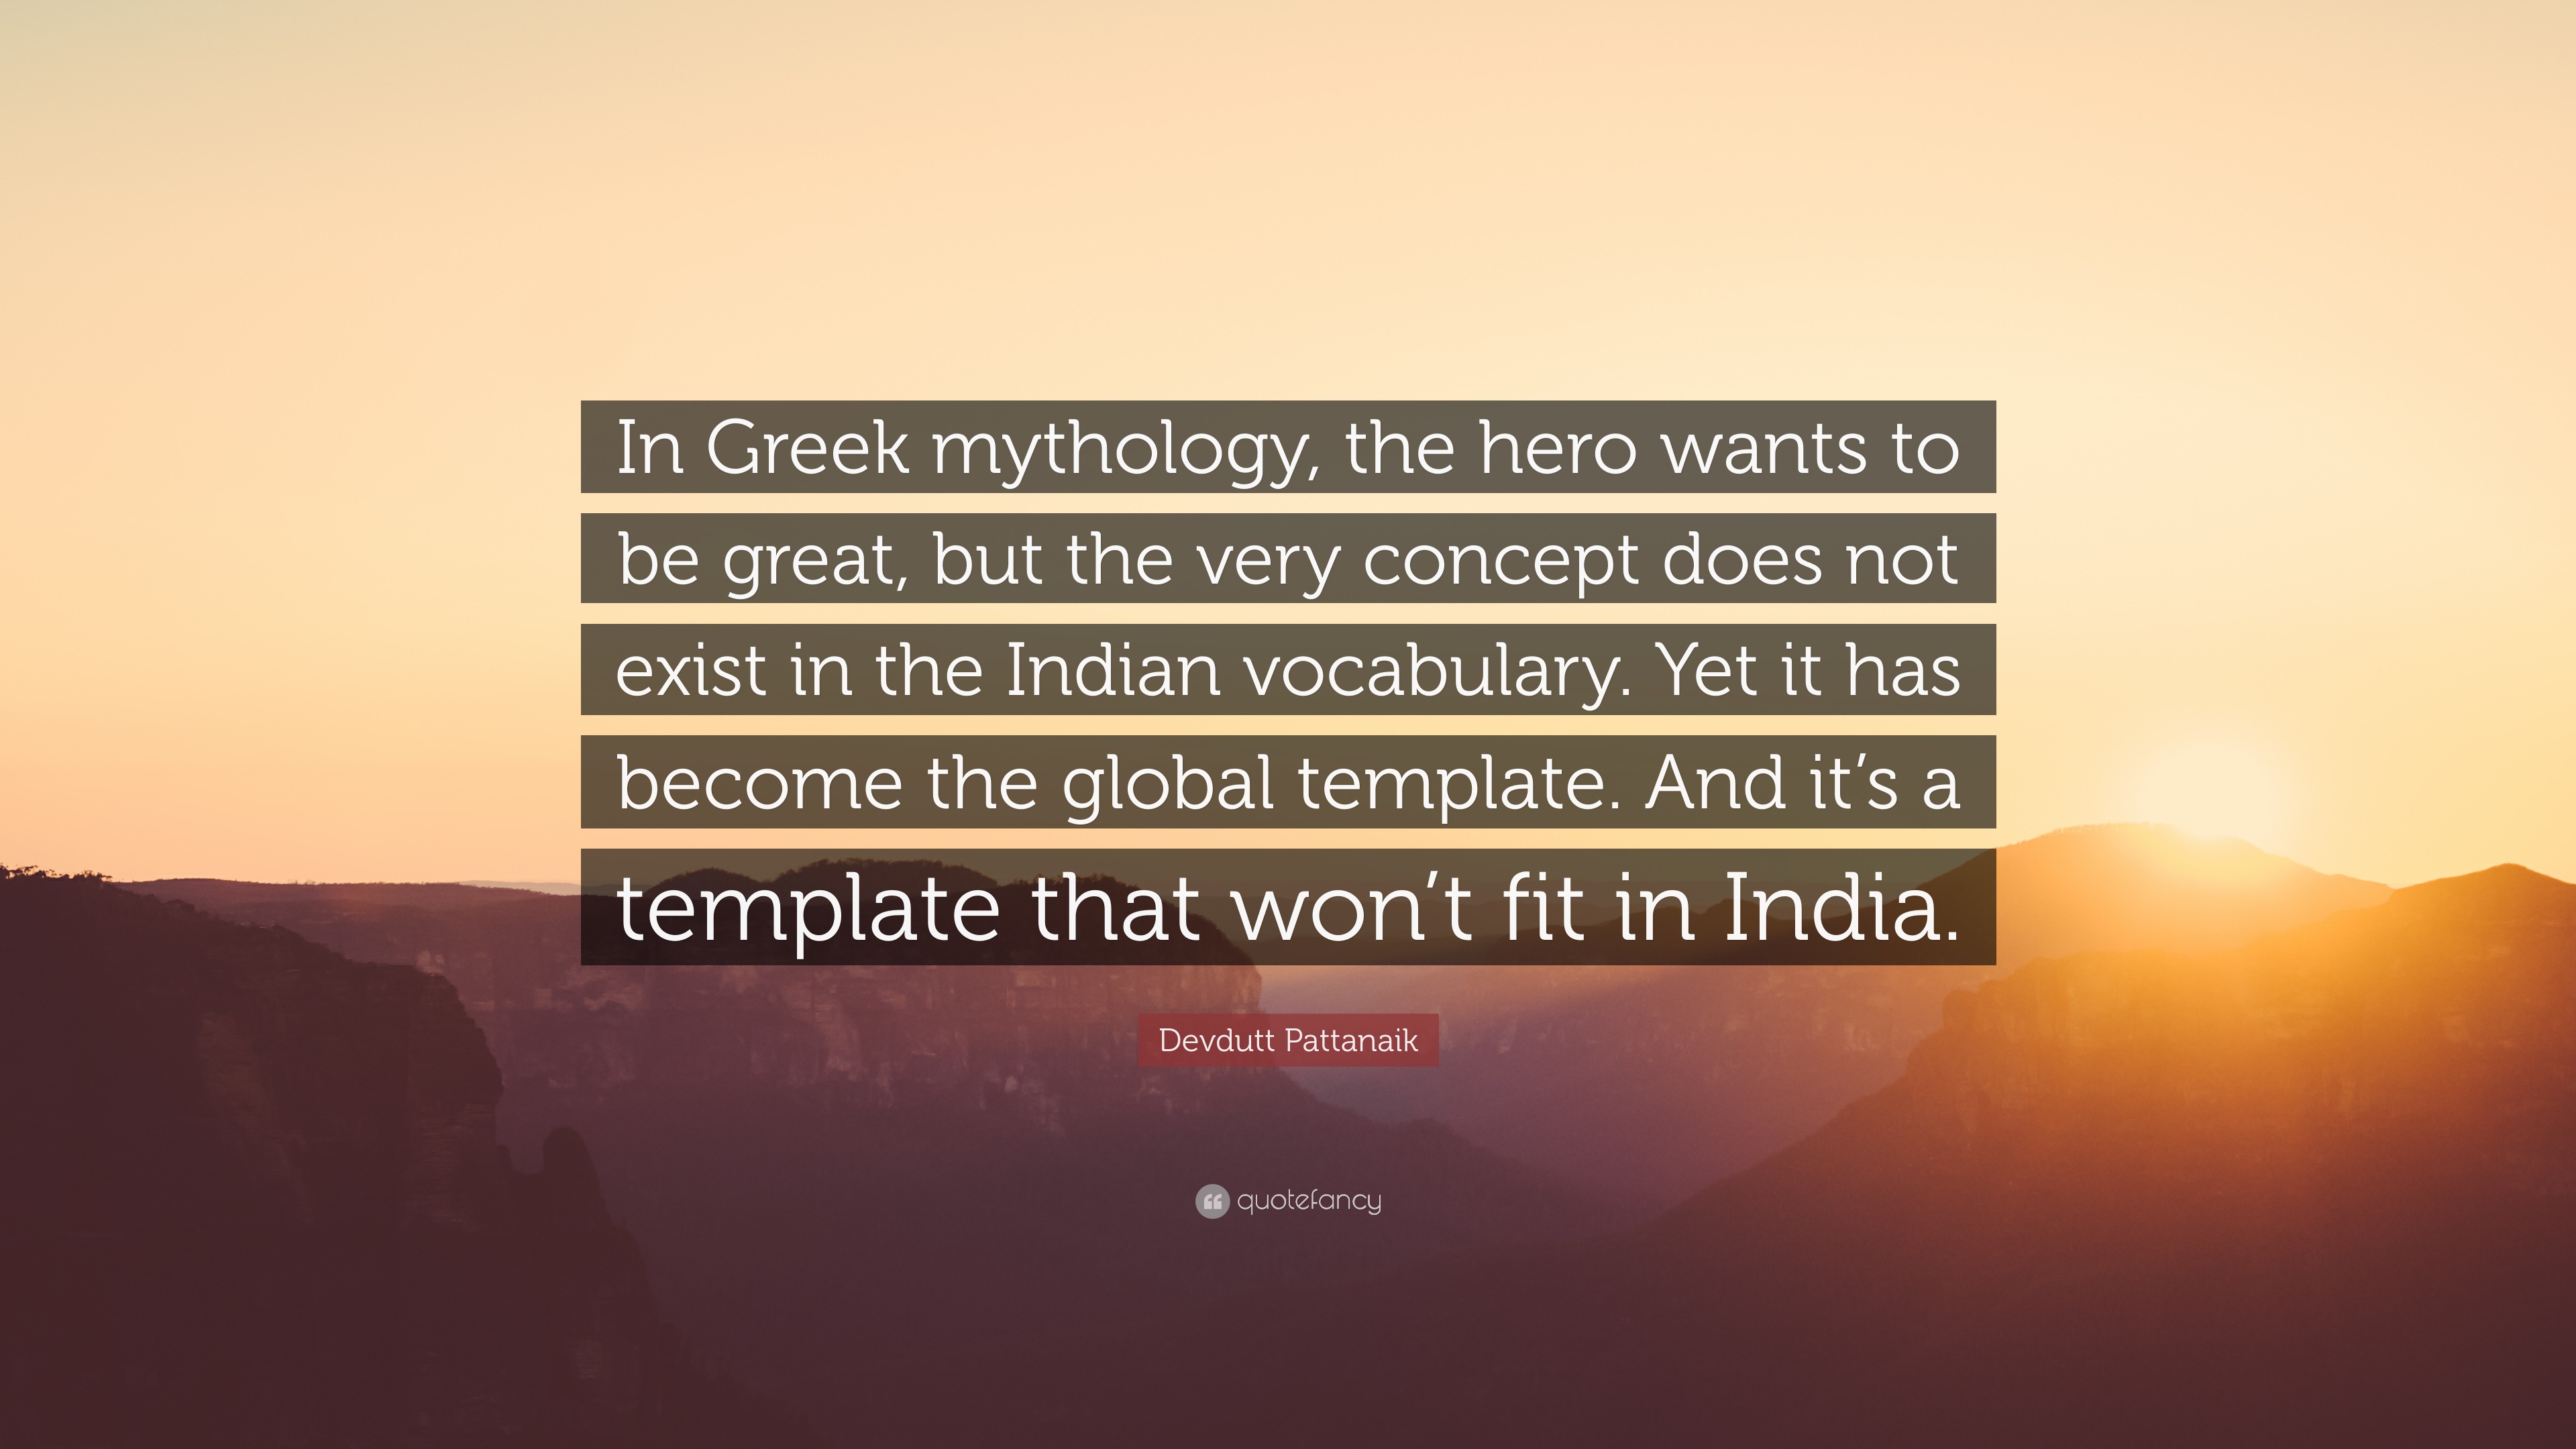 Devdutt Pattanaik Quote In Greek Mythology The Hero Wants To Be Great But The Very Concept Does Not Exist In The Indian Vocabulary Yet It Has 7 Wallpapers Quotefancy